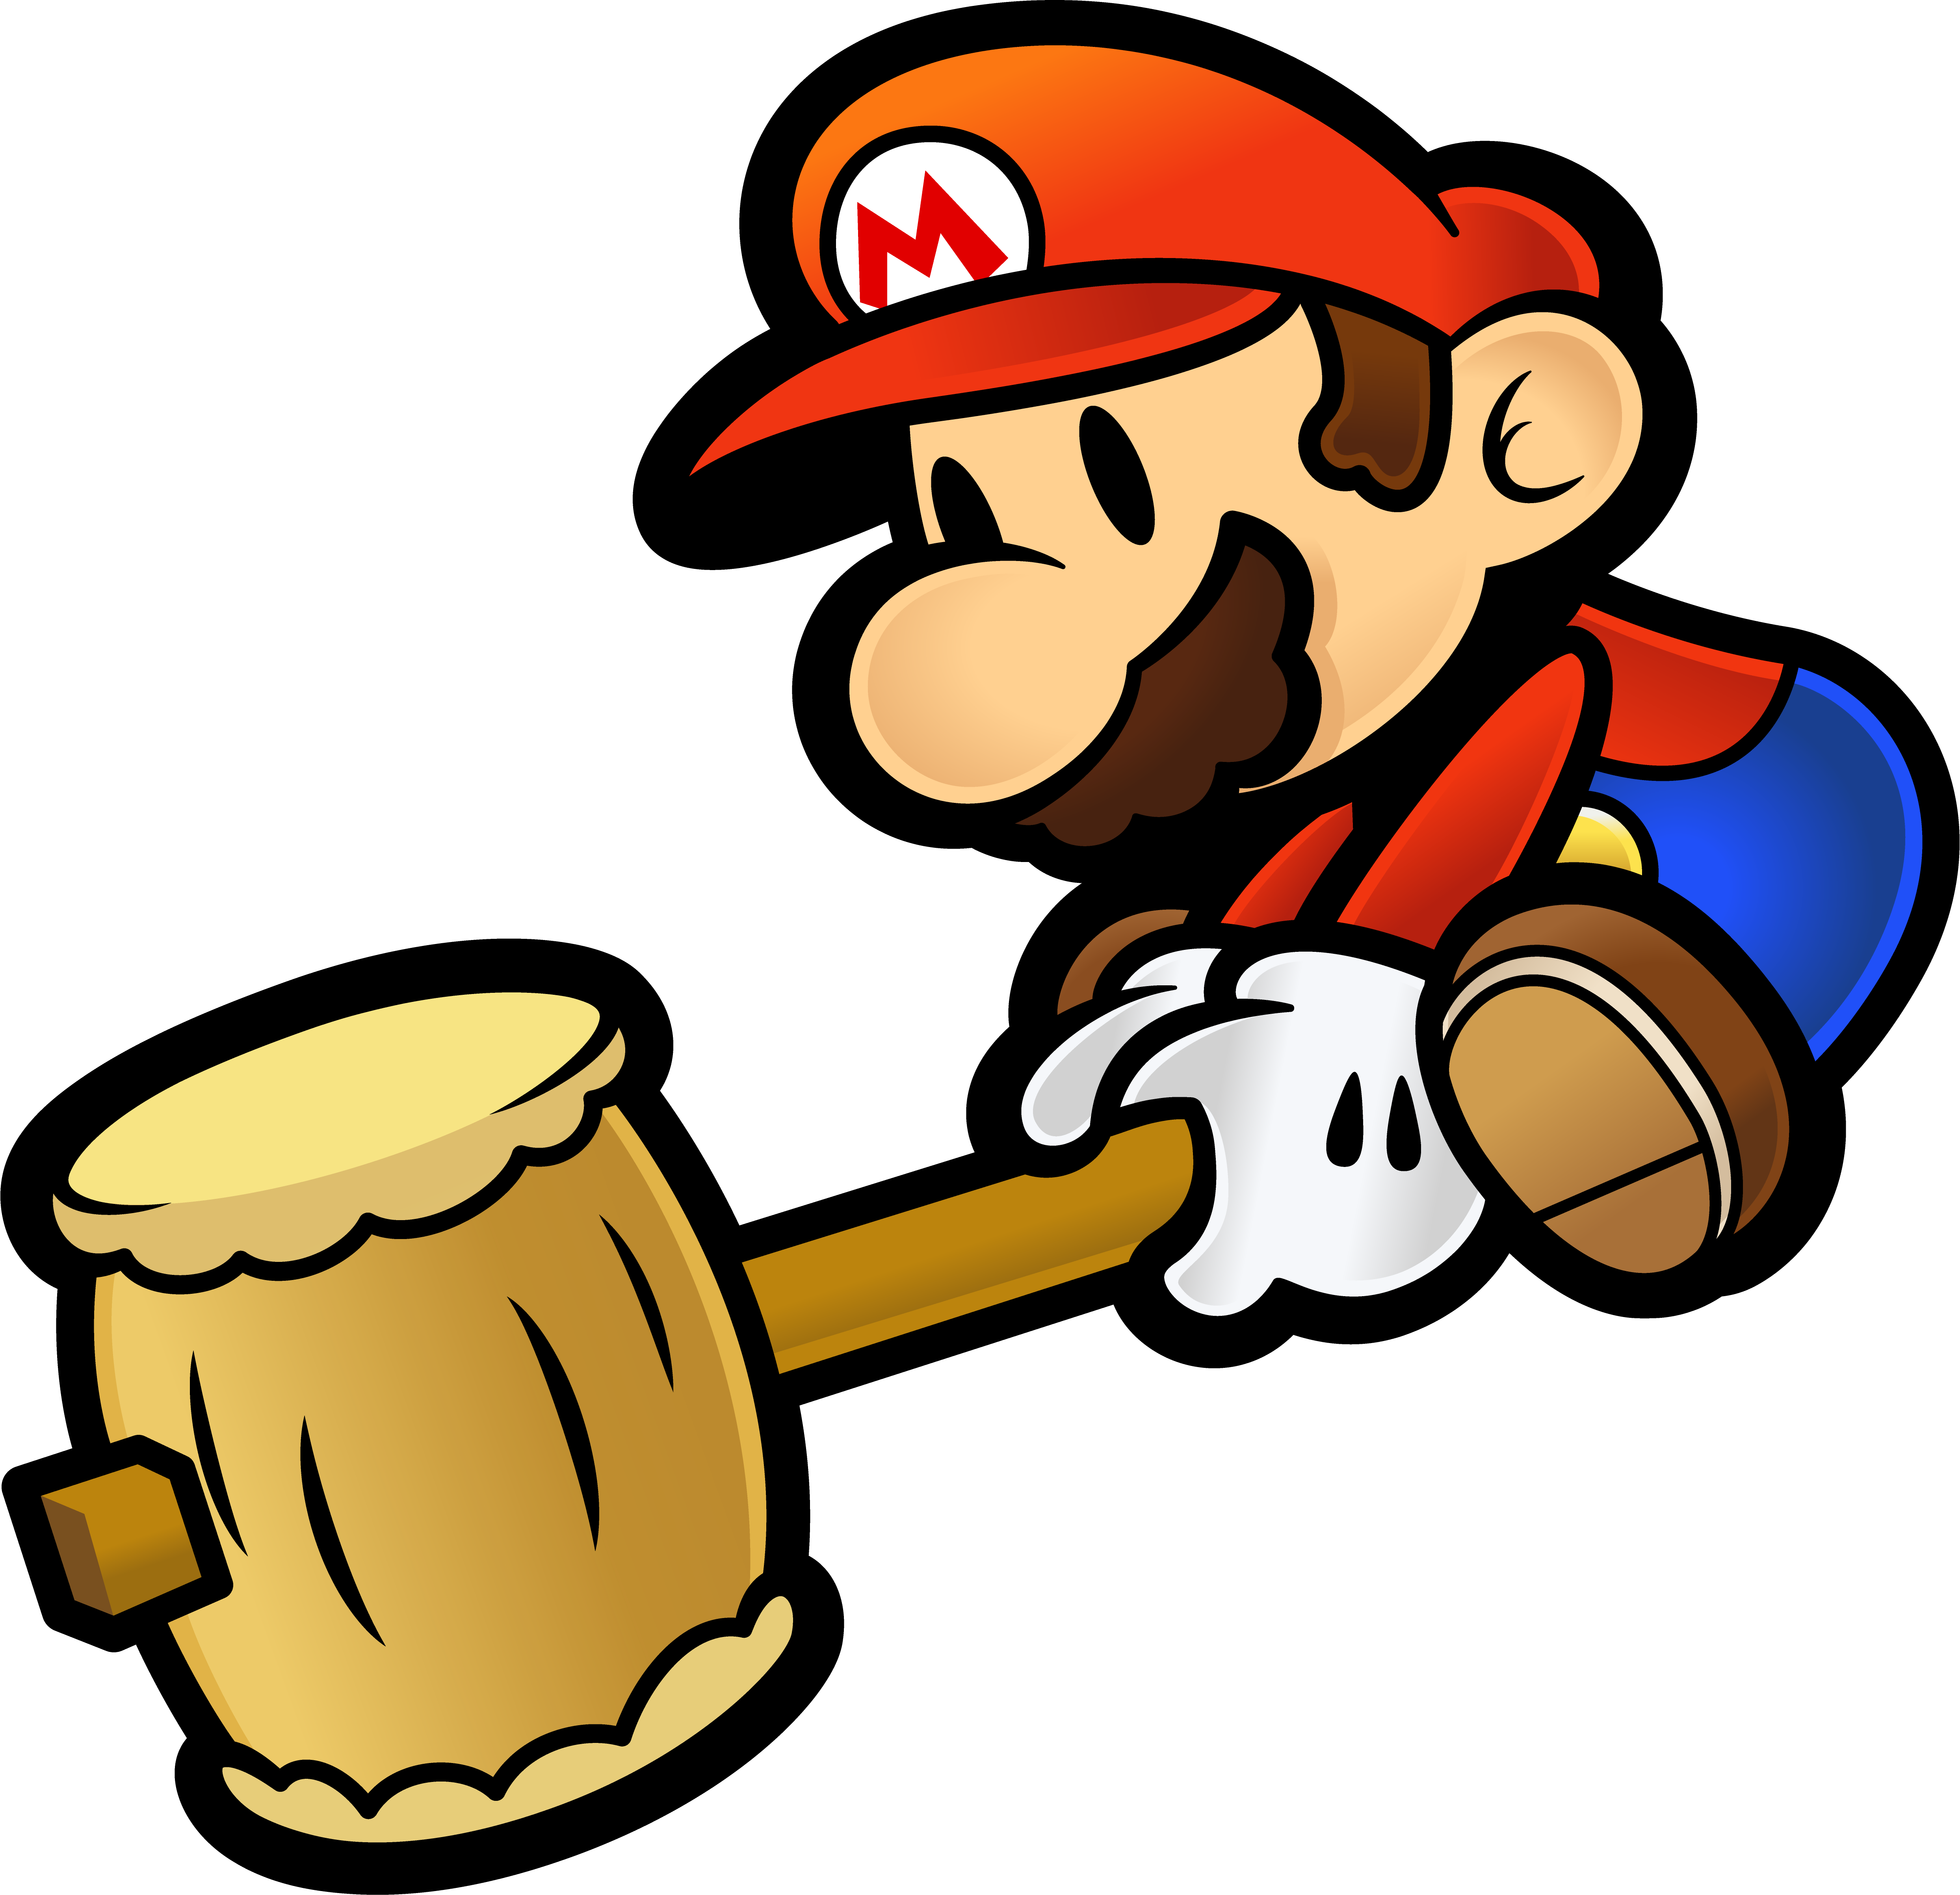 paper_mario_spirit_remastered_by_fawfulthegreat64-dcr9v1k.png